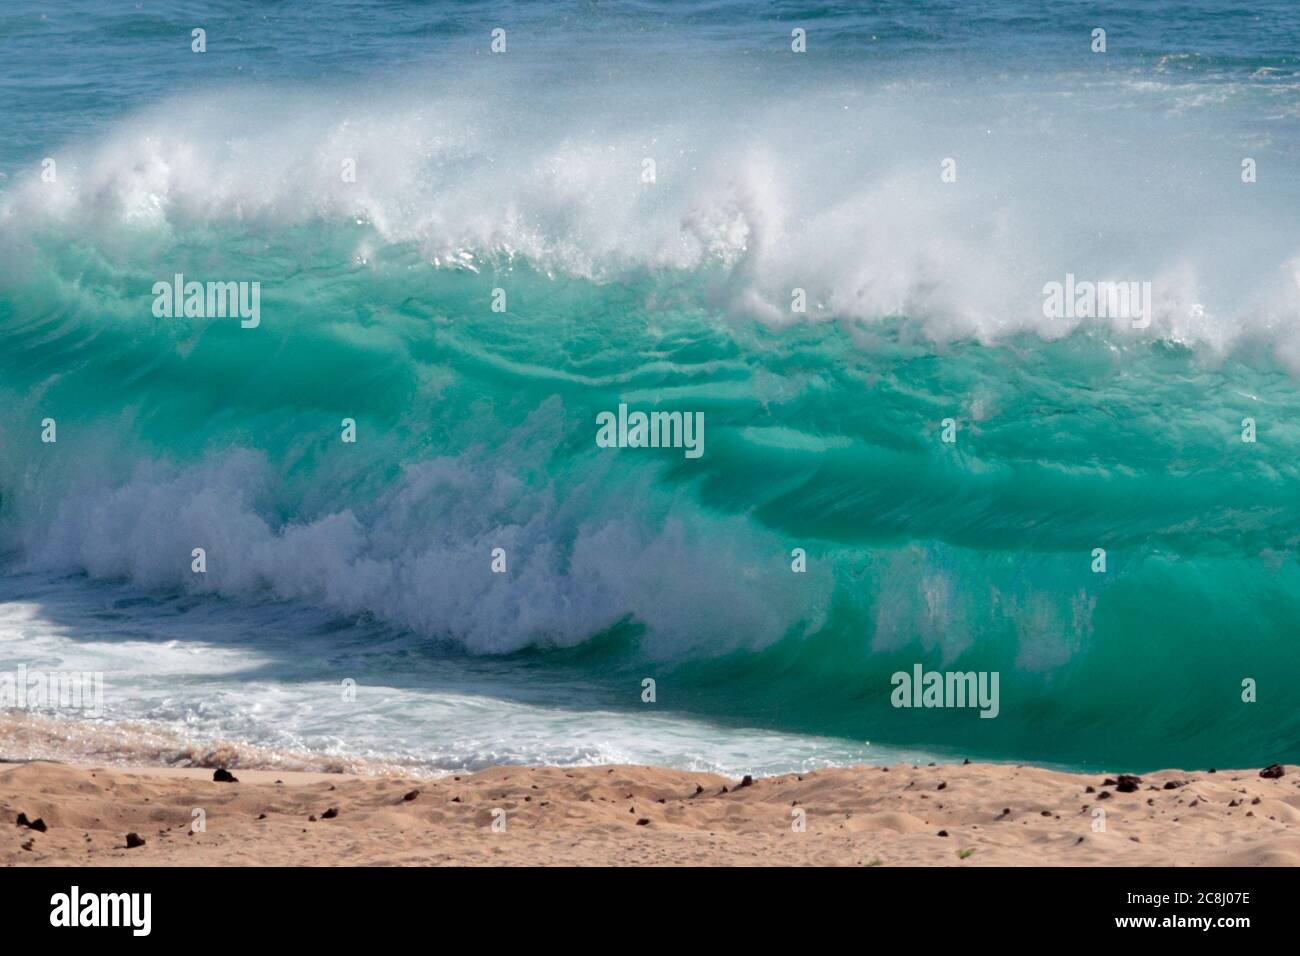 View of wave breaking on beach, Georgetown, Ascension Island, mid-Atlantic Ocean 23rd April 2018 Stock Photo